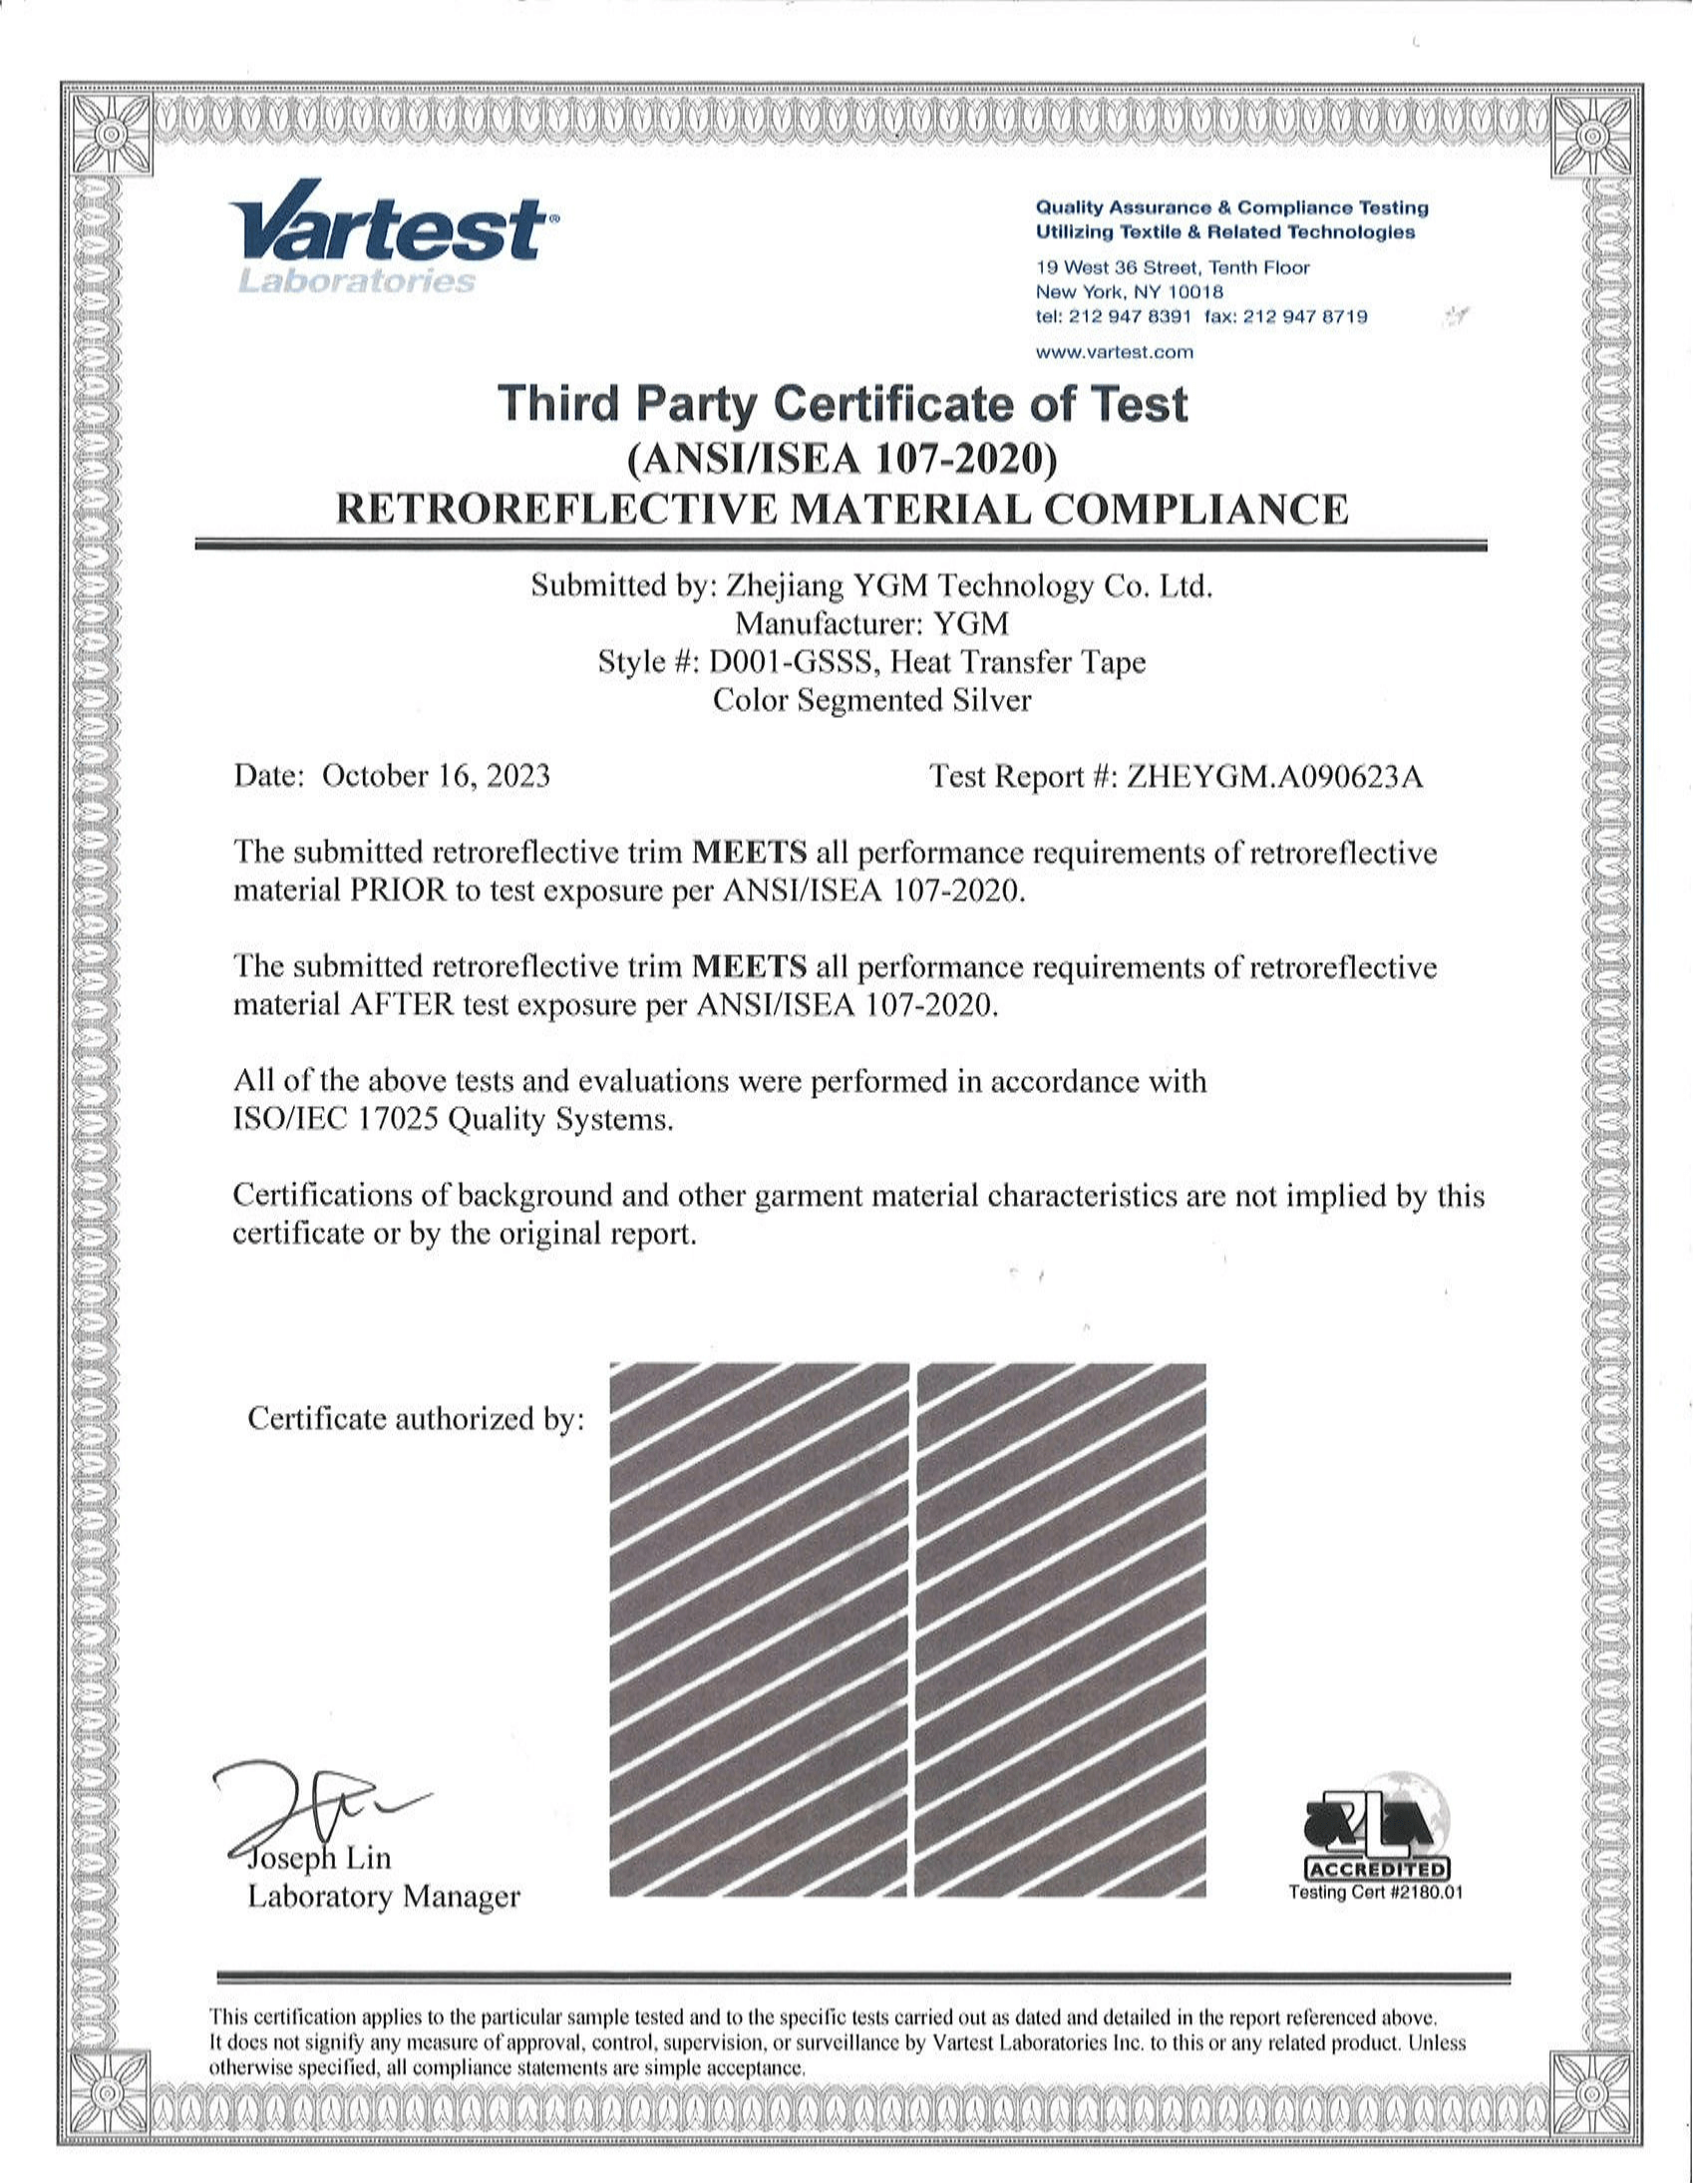 ANSI/ISEA 107 Certificate & Test Report for Heat Transfer Tape Color Segmented Silver(D001-GSSS Product)